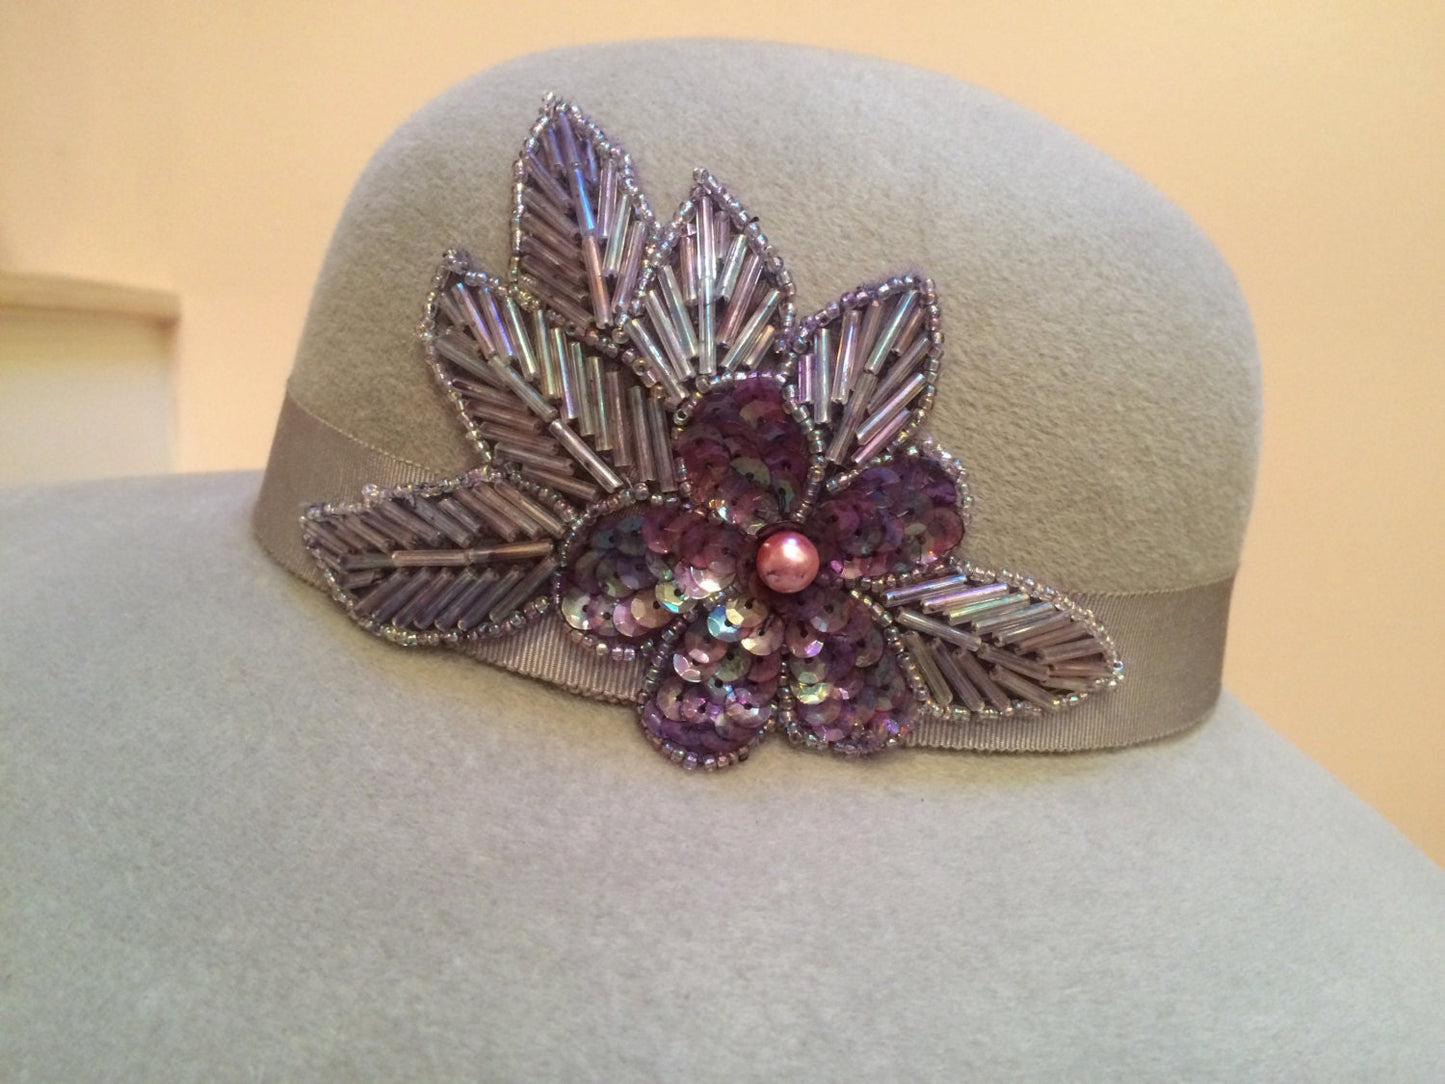 Wide Wavy Brimmed Hat, Grey Velour Hat with Beaded appliqué in Purples and Mauves. Beaded appliqué on Grey Velour hat. Church or wedding hat